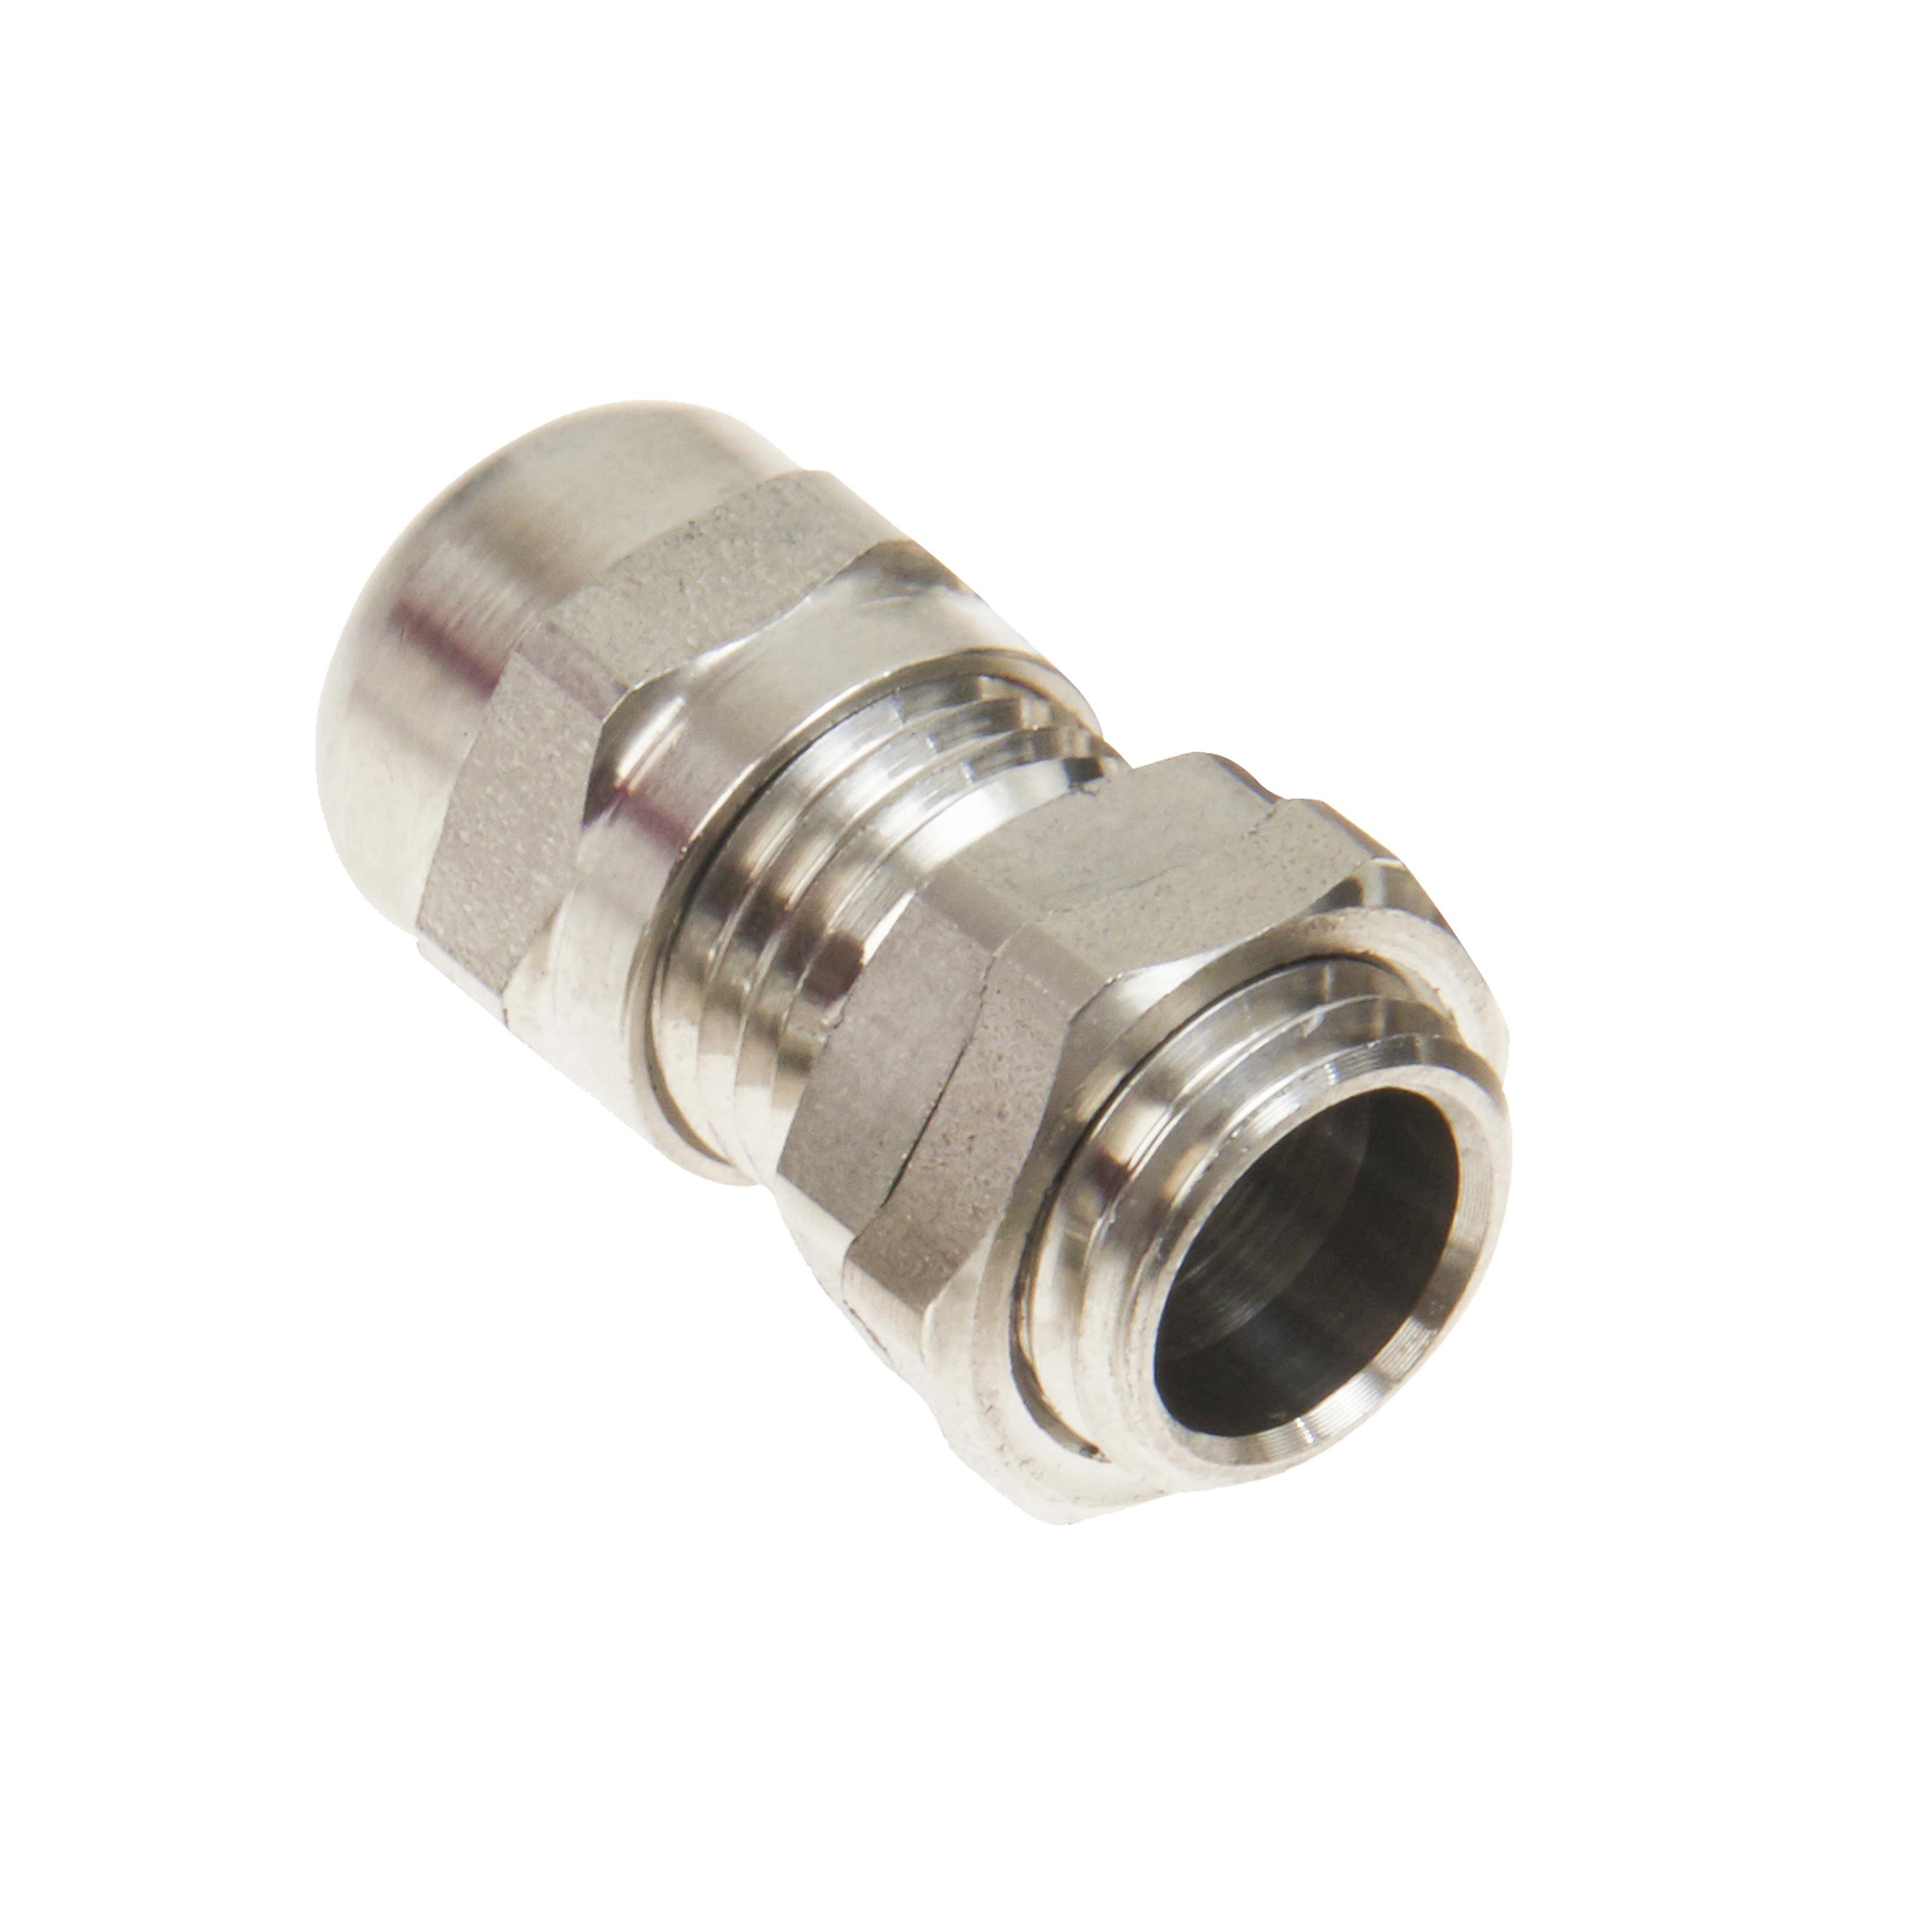 【NSYCGX40H】CABLE GLAND S.STEEL 316L+NUT M40